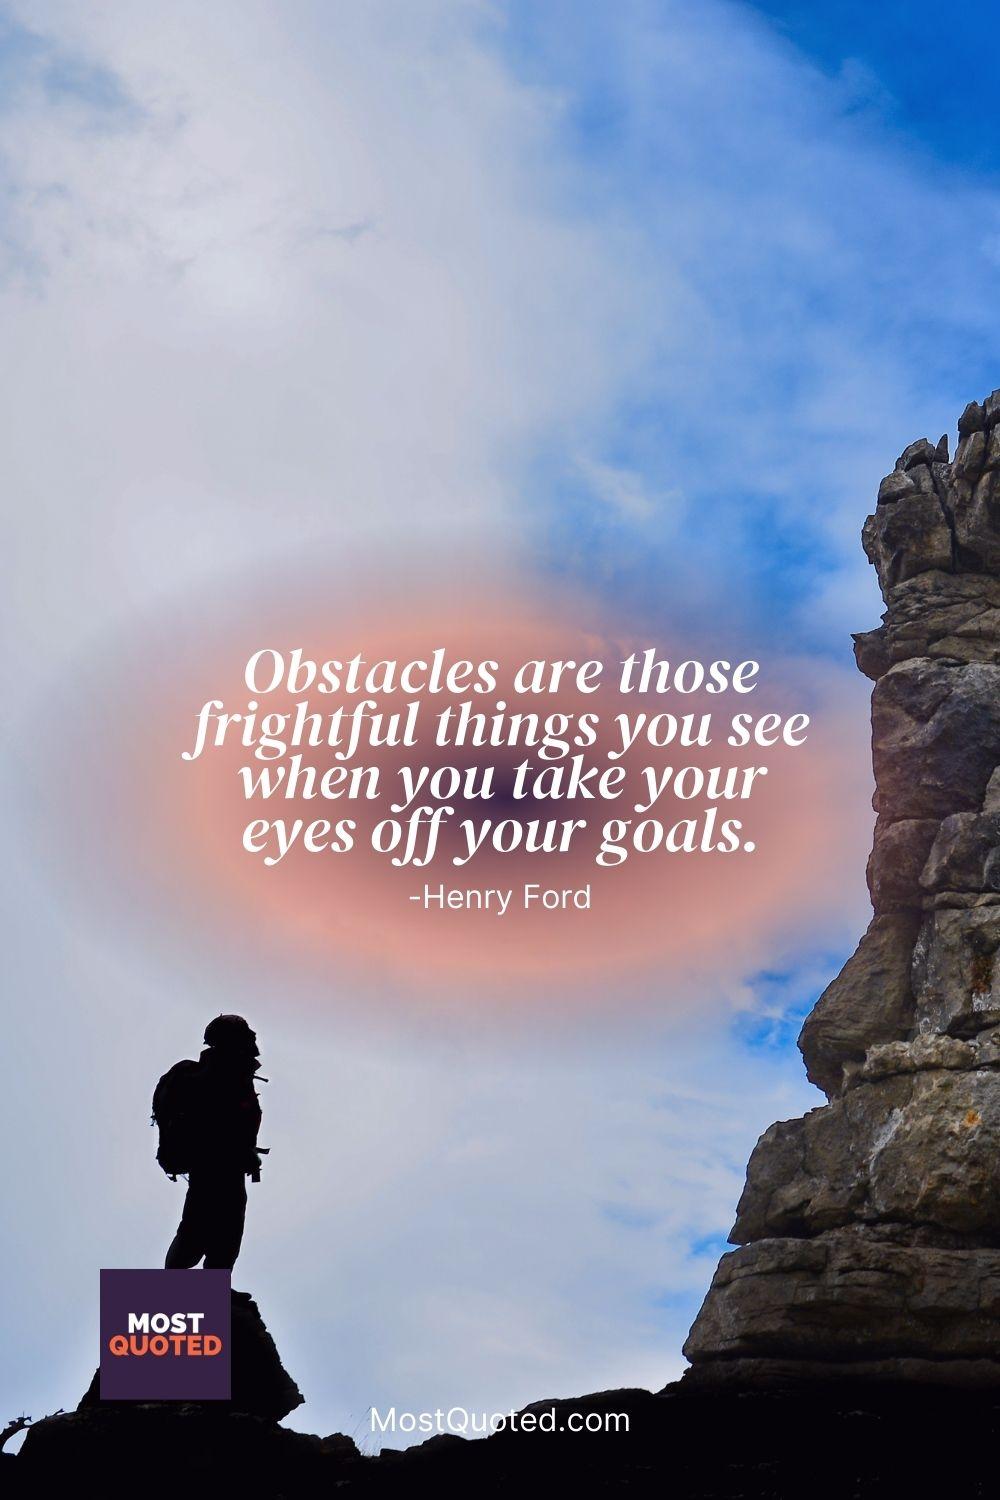 Obstacles are those frightful things you see when you take your eyes off your goals. - Henry Ford